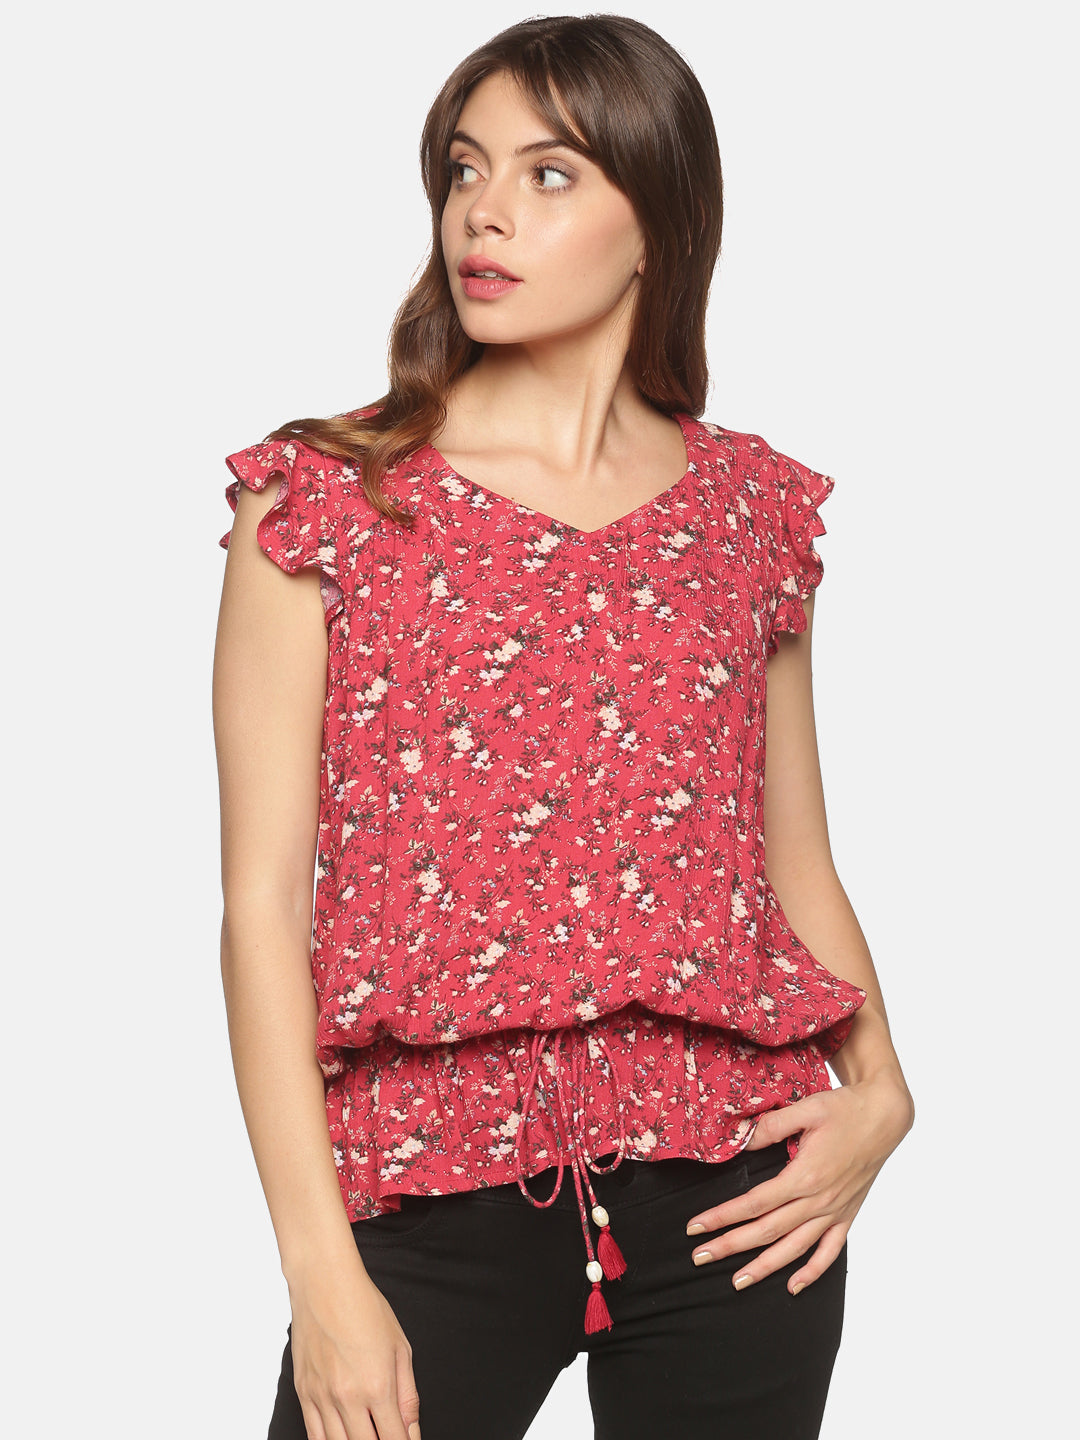 Red Cotton Floral Printed Peplum Top with Frill Sleeves & Waist Tie-up